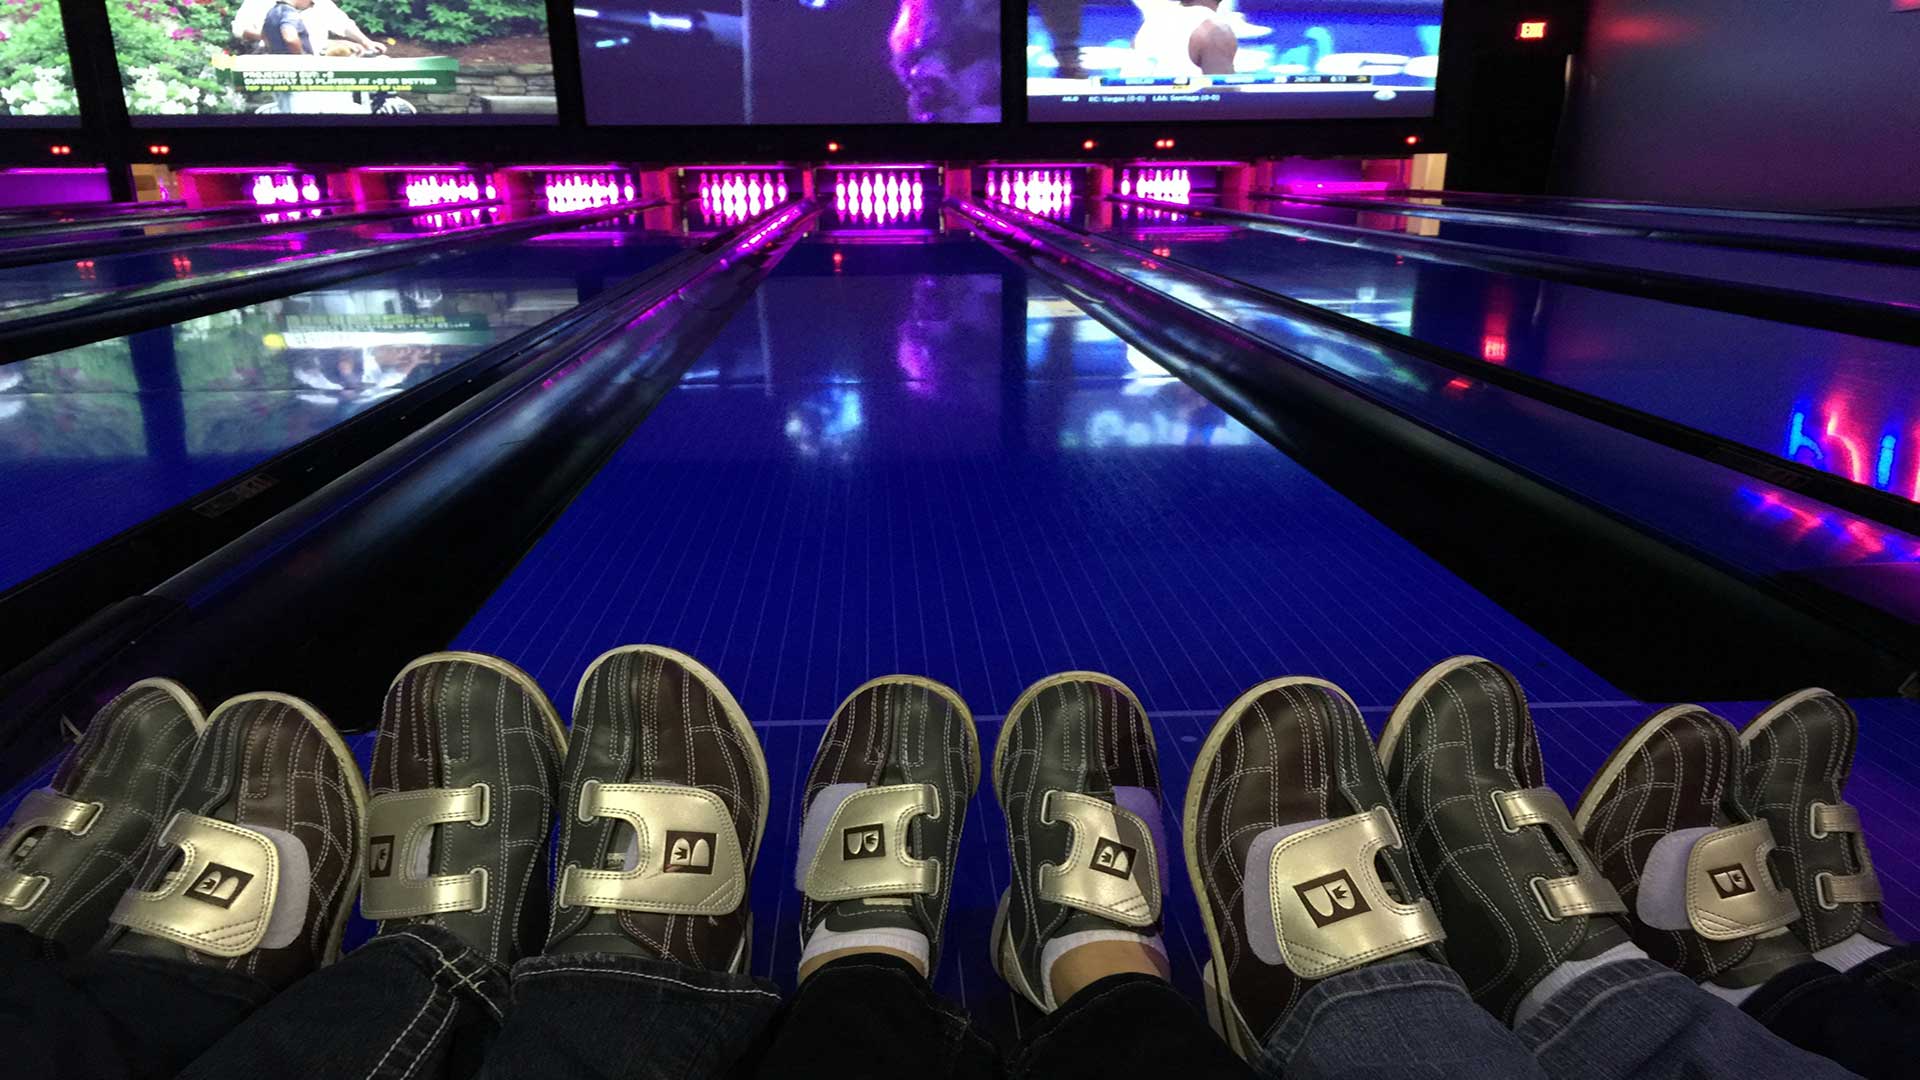 Cute Shoes Lined Up On Lanes